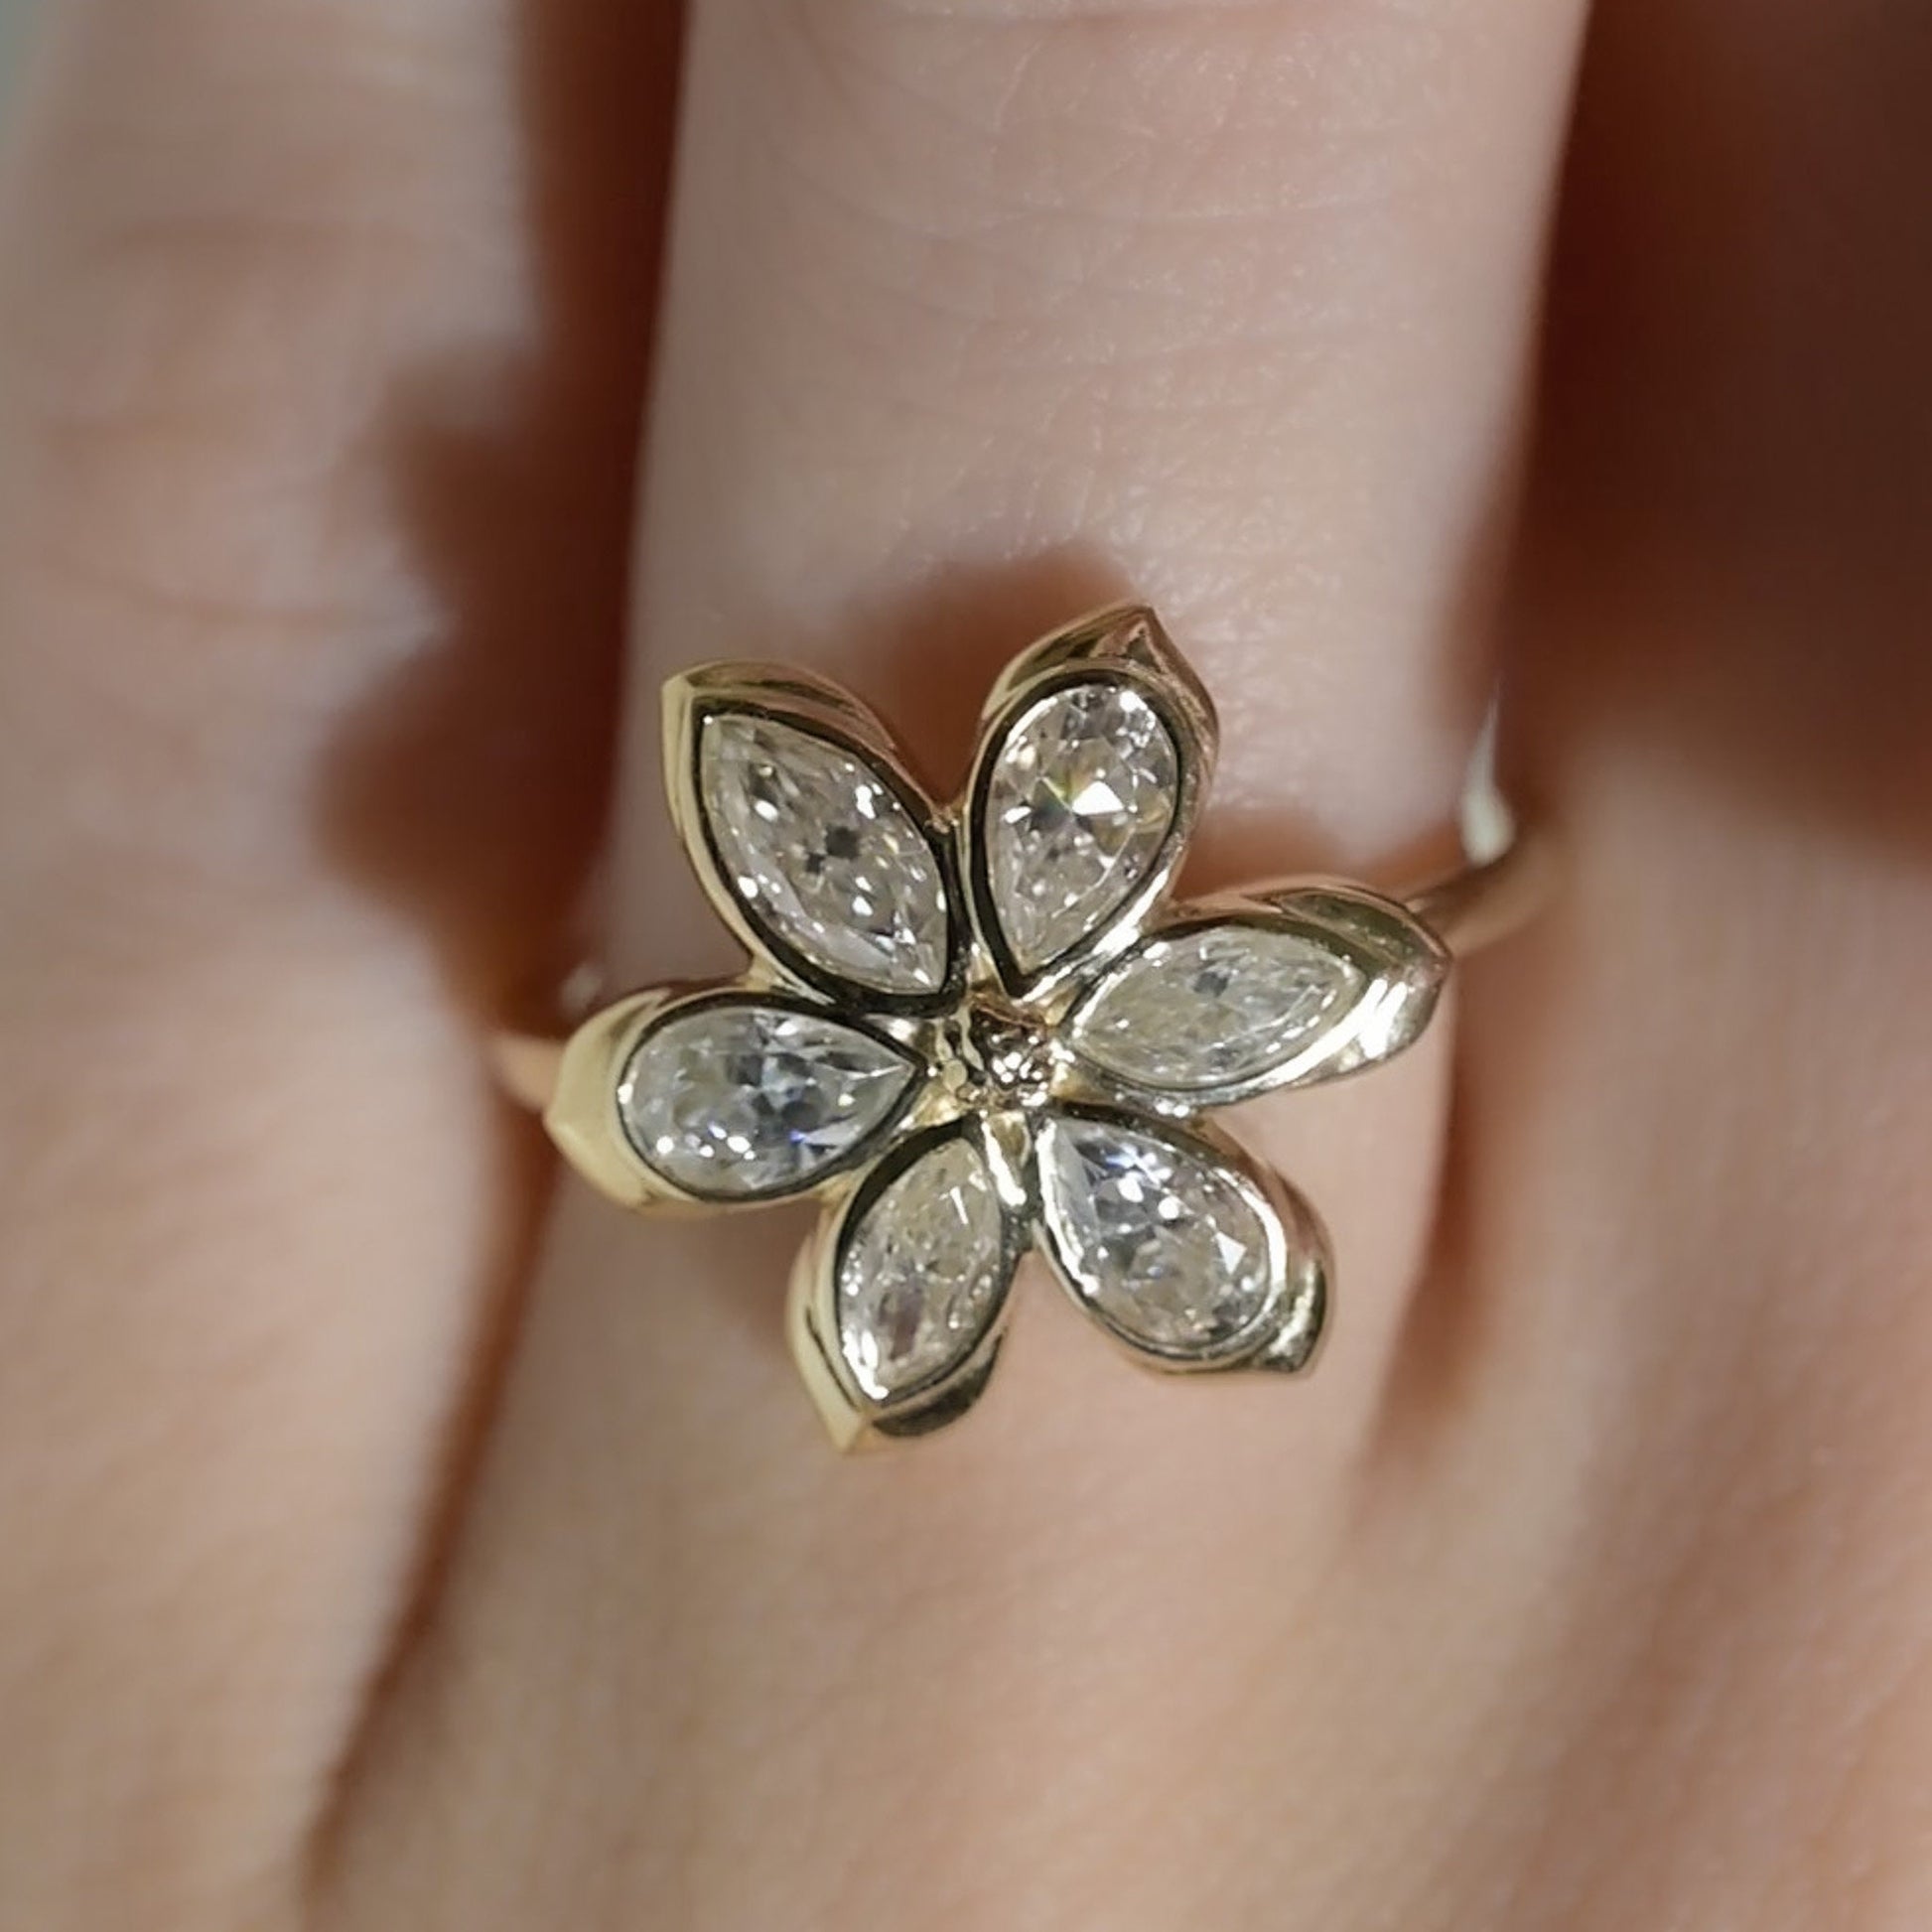 Diamond or Moissanite Engagement Ring, 5 marquises and pear-shaped petals with solid gold, 1.2ct